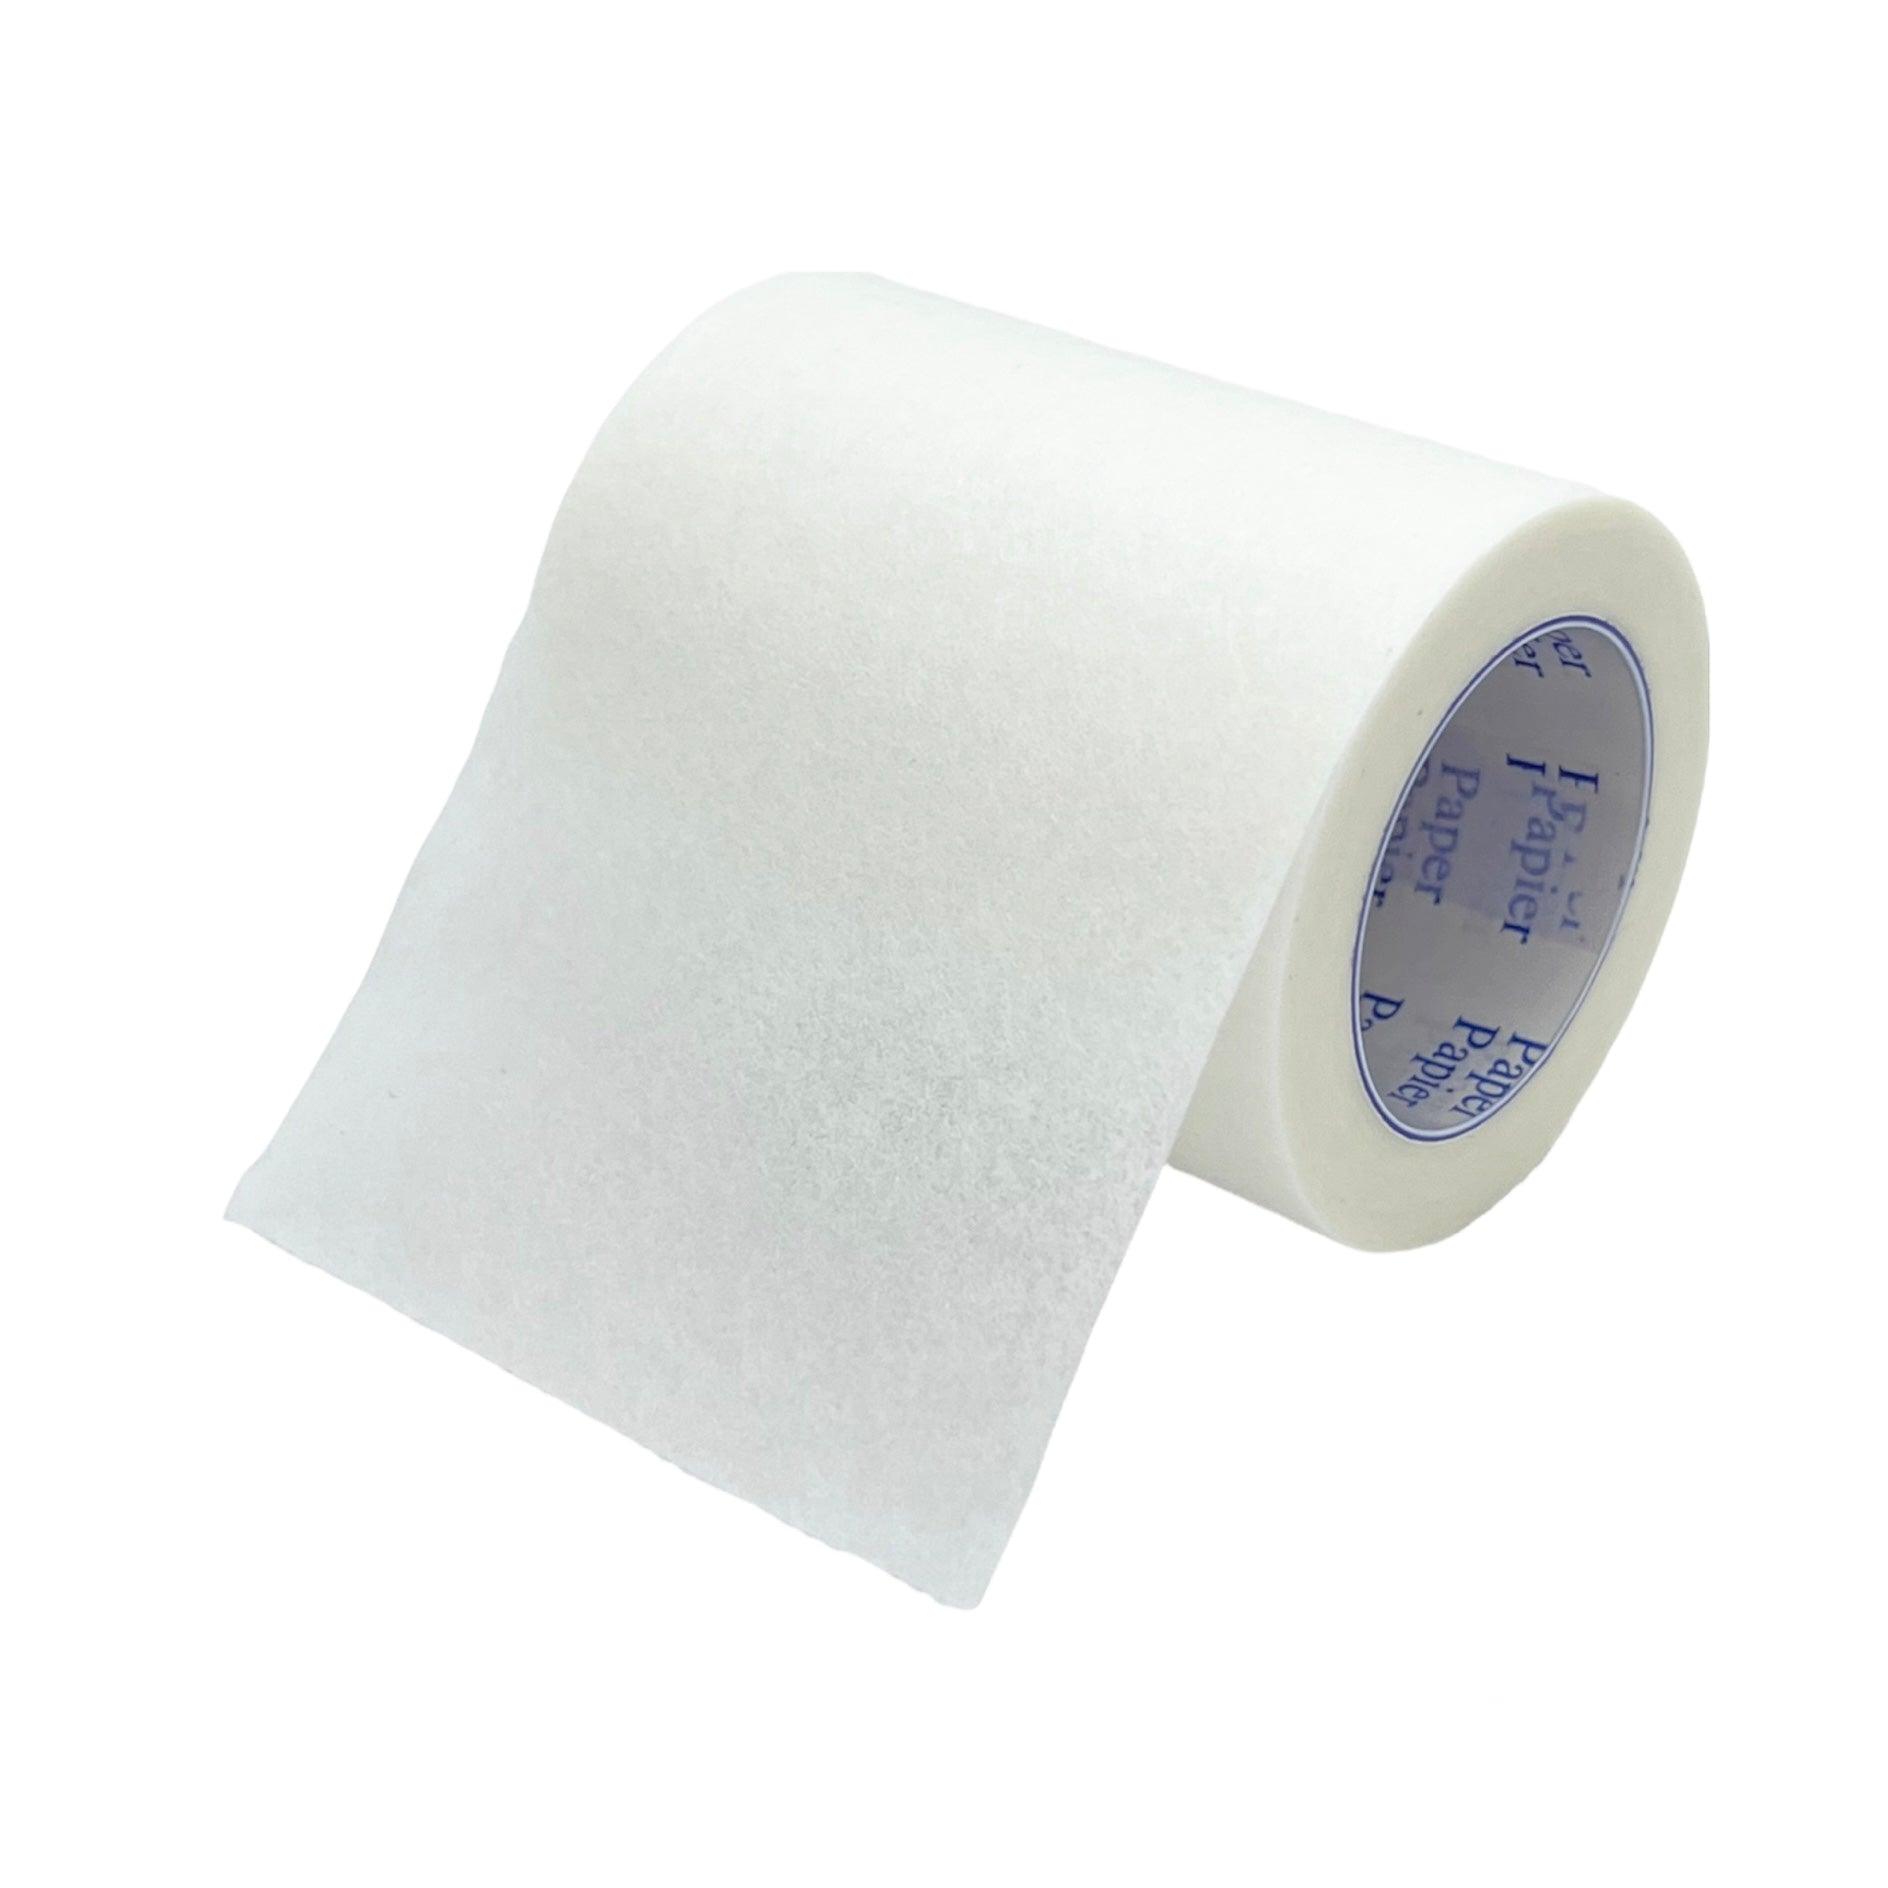 AMD Ritmed - Micropore Paper Surgical Tape (2" x 10 yds)